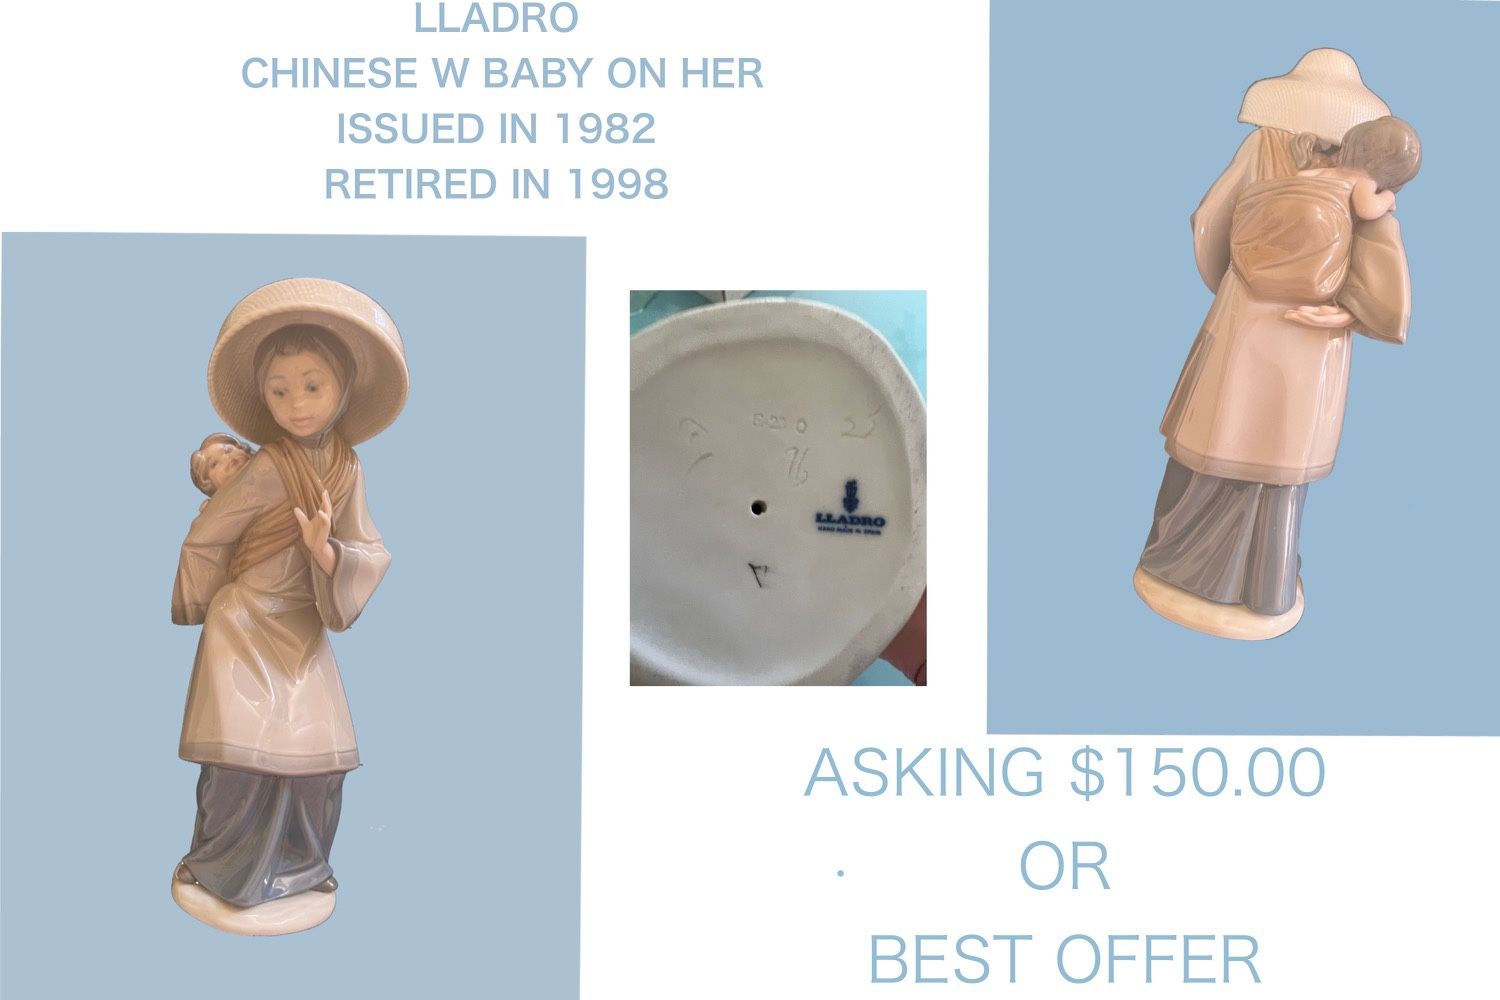 Lladro “Chinese with baby on her”